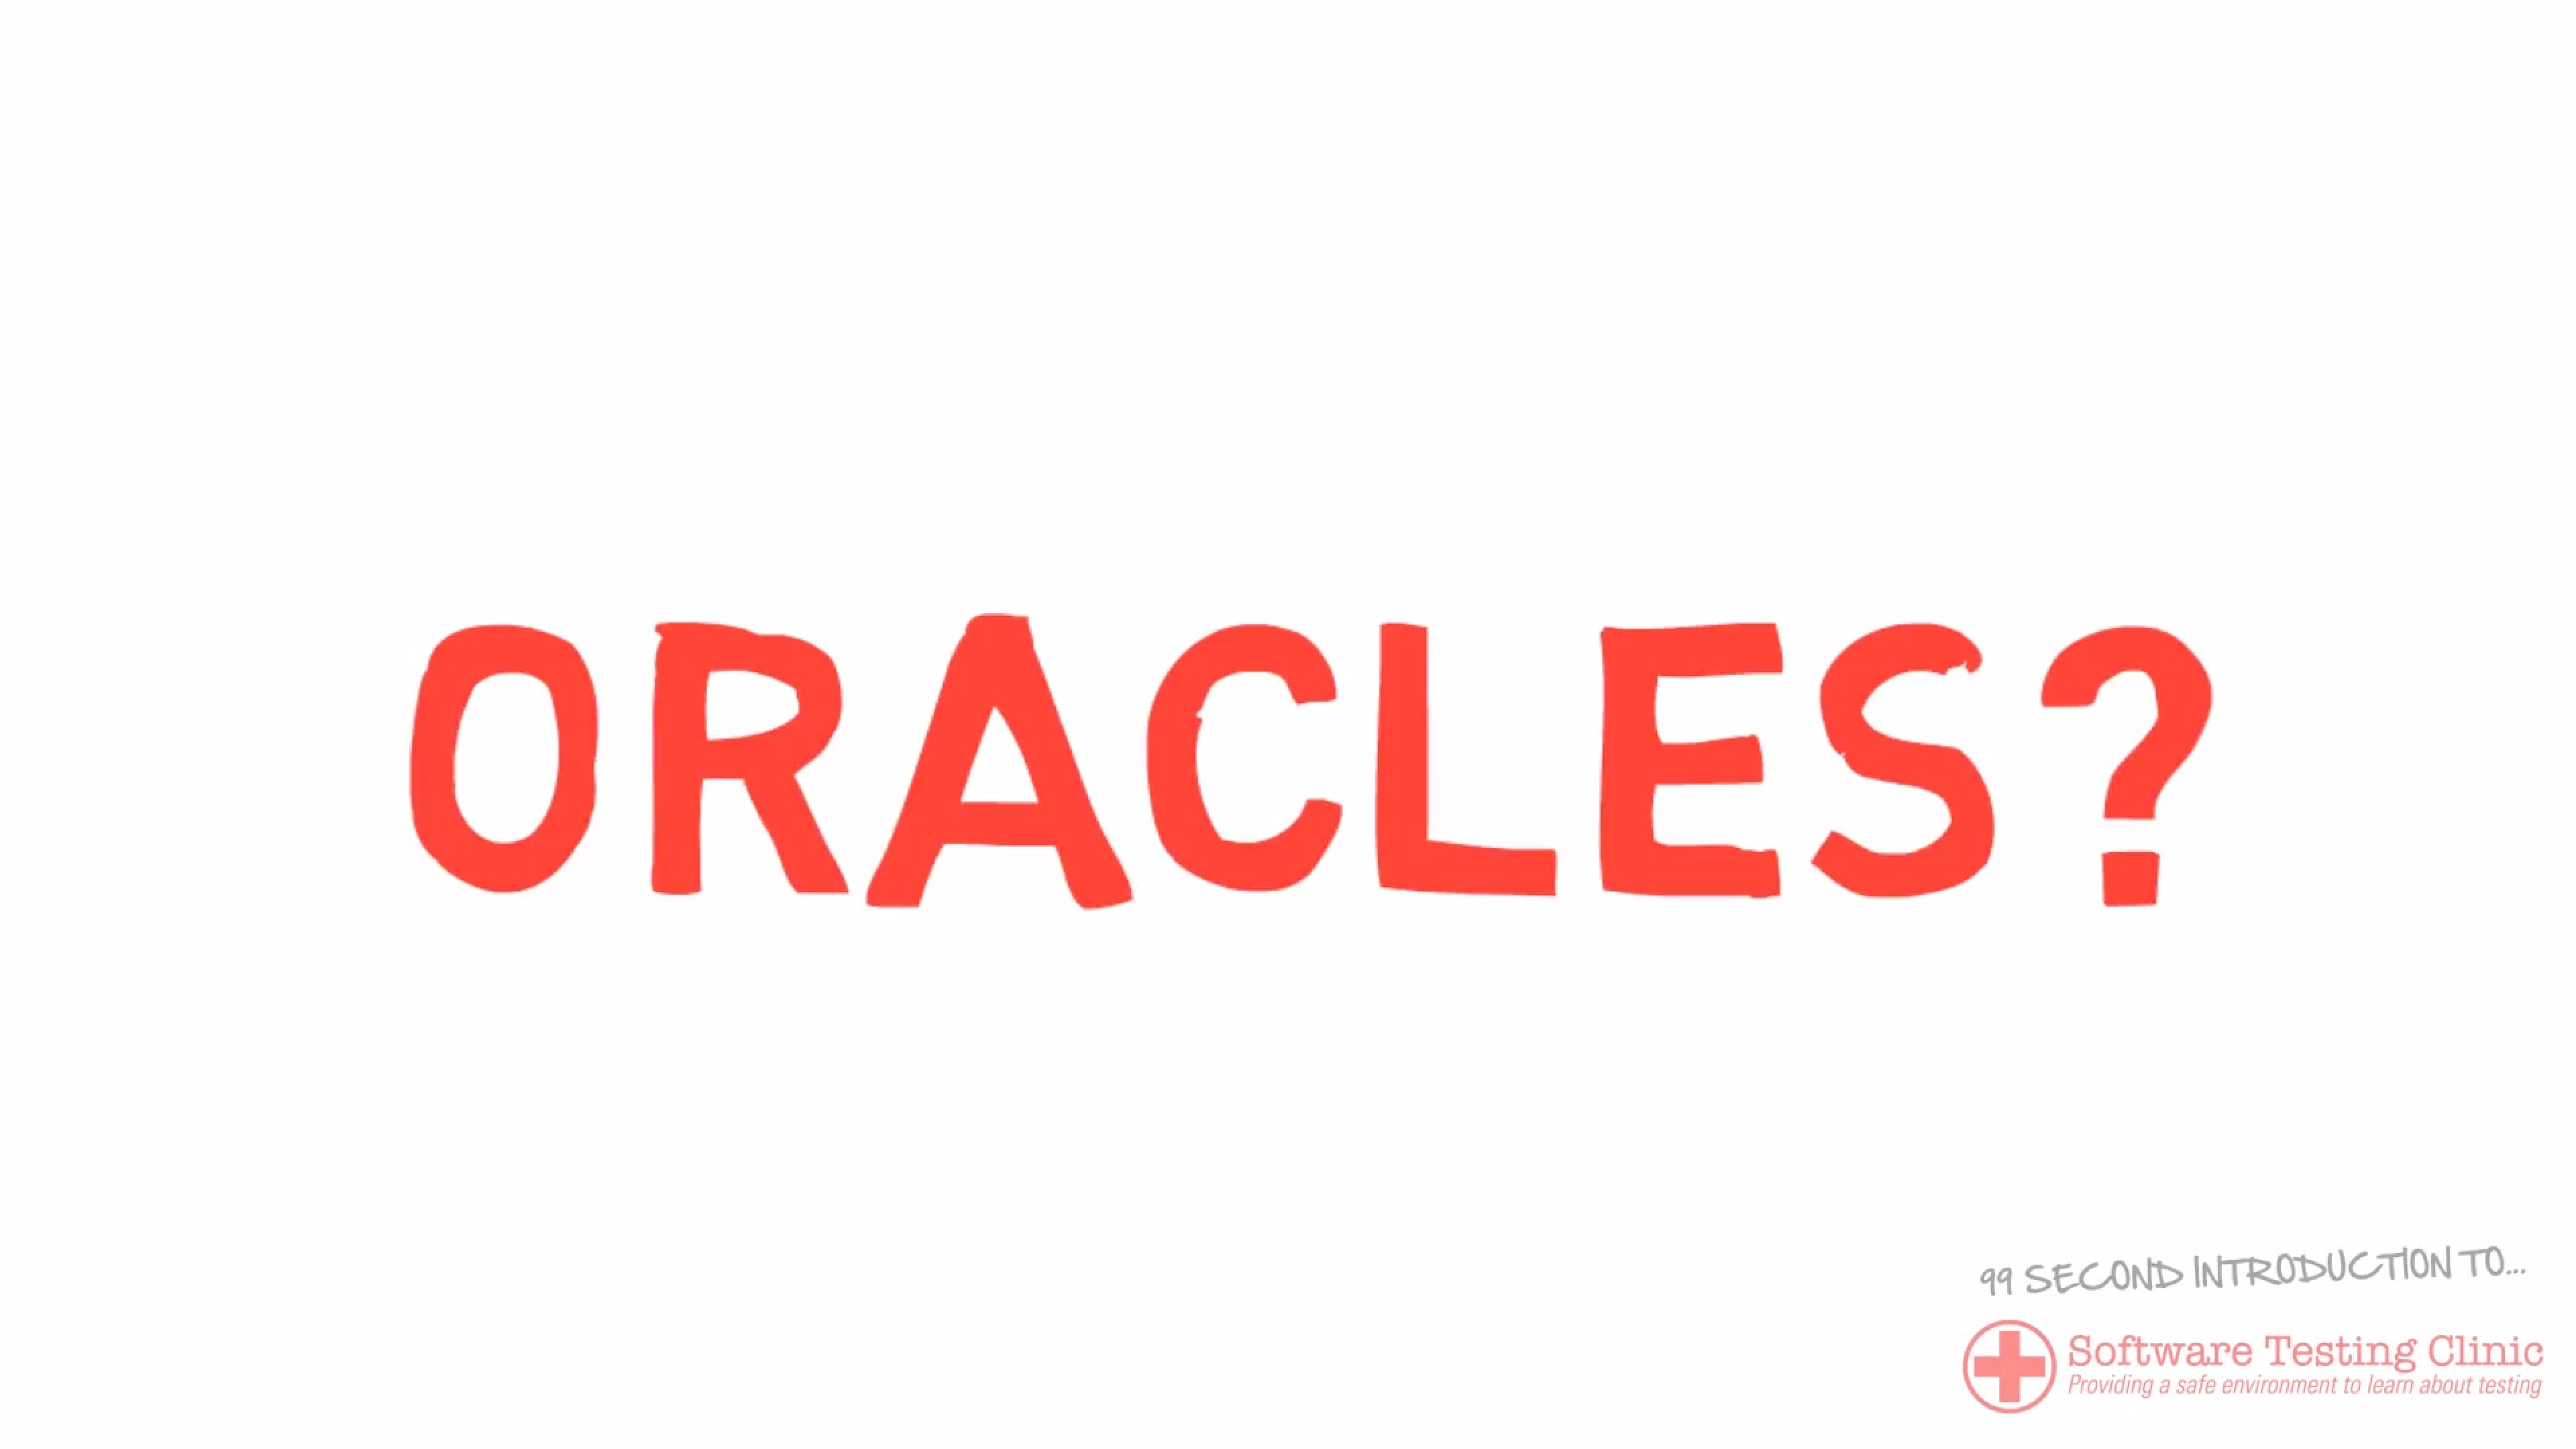 99 Second Introduction to Oracles